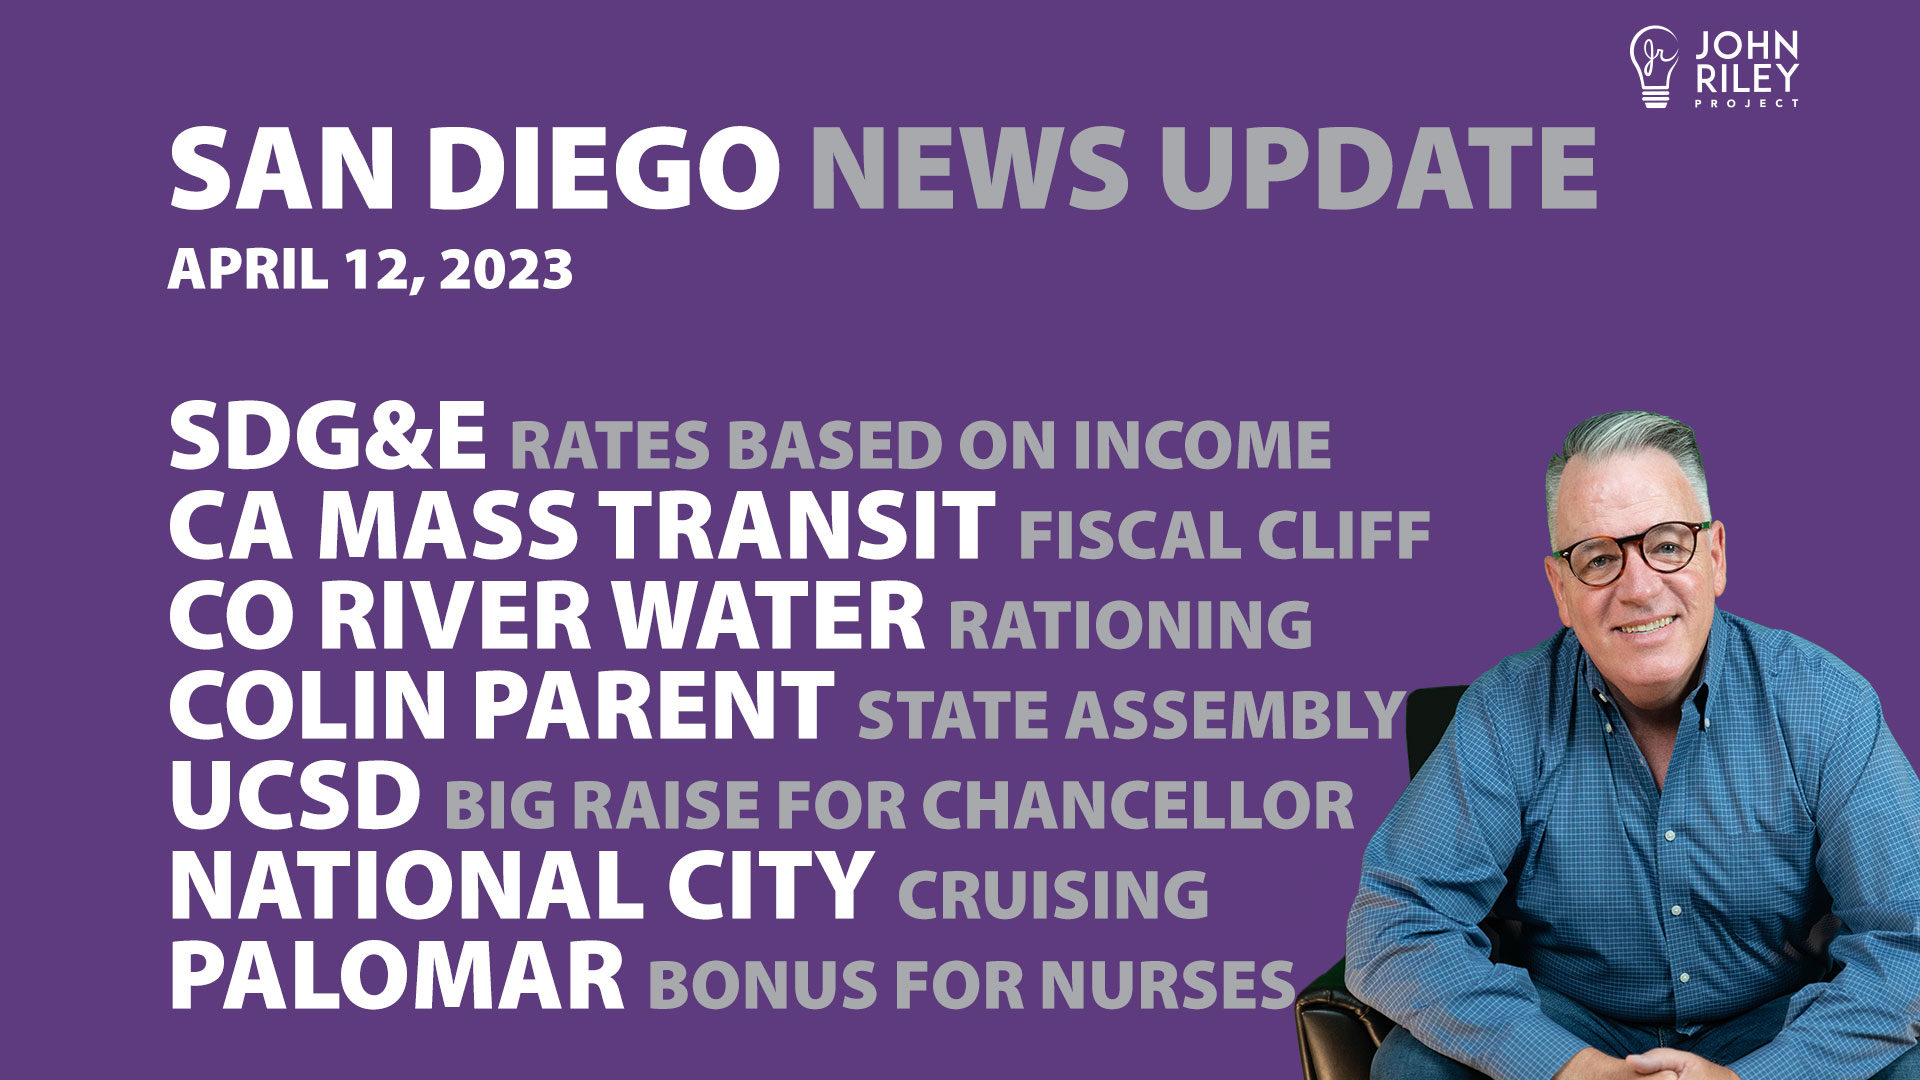 John Riley discusses San Diego News Update April 12: SDGE Rates, Mass Transit Problems, Water Rationing